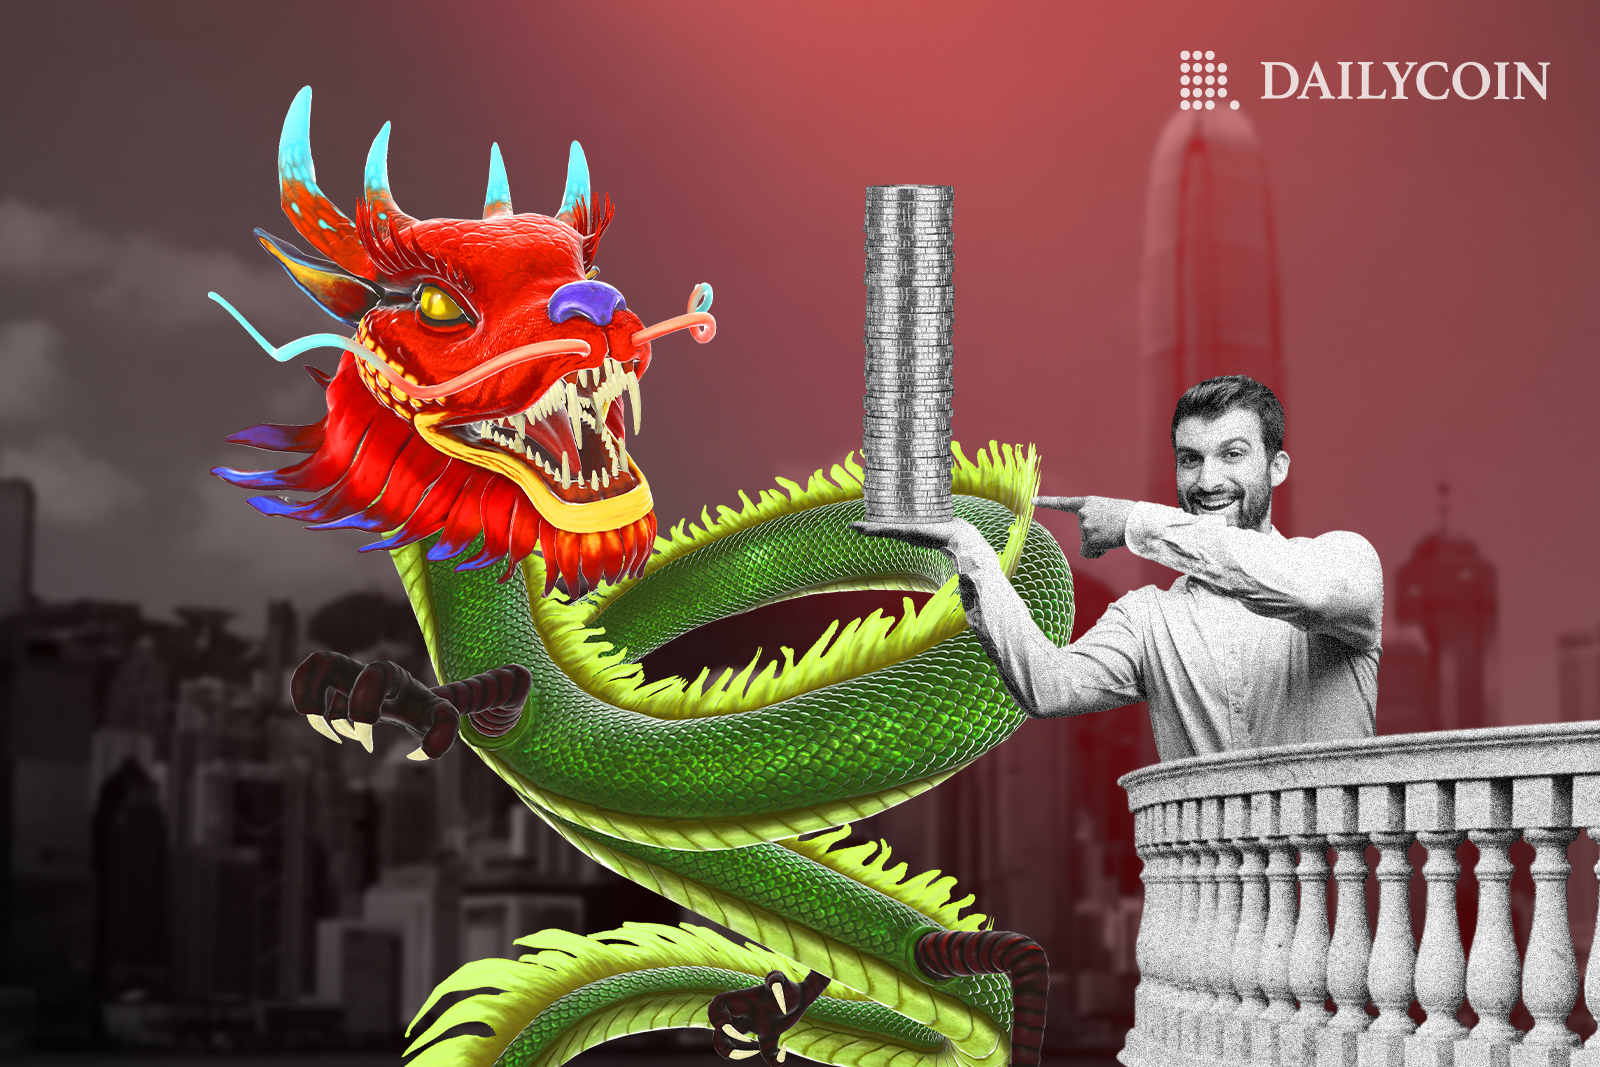 A man on the balcony holding neatly stacked crypto coins in front of a dragon in Hong Kong.